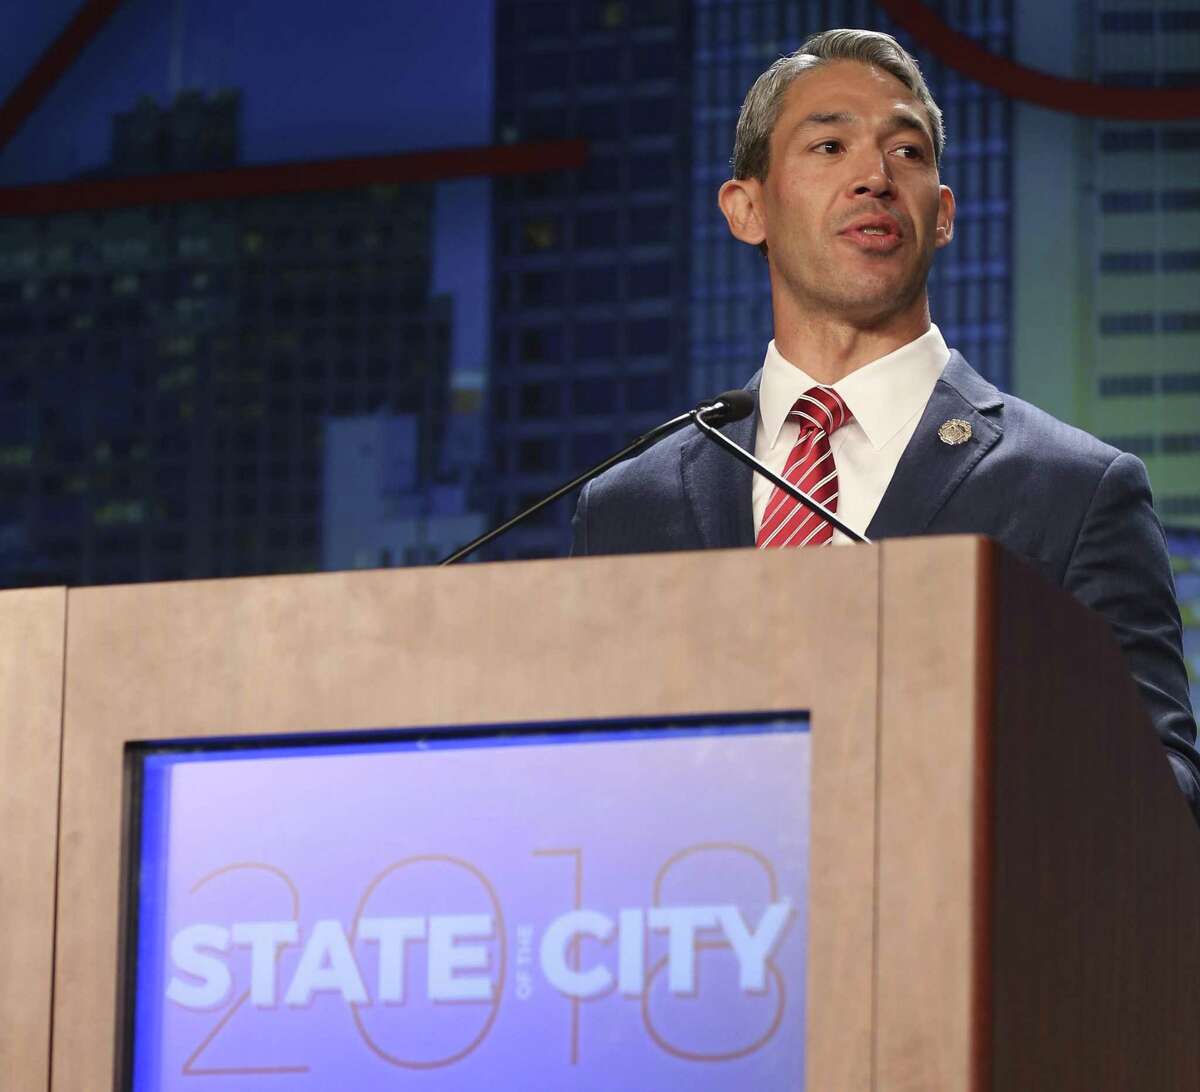 Mayor Ron Nirenberg gives the state of the city address Tuesday, April 10, 2018 at the San Antonio Convention Center.